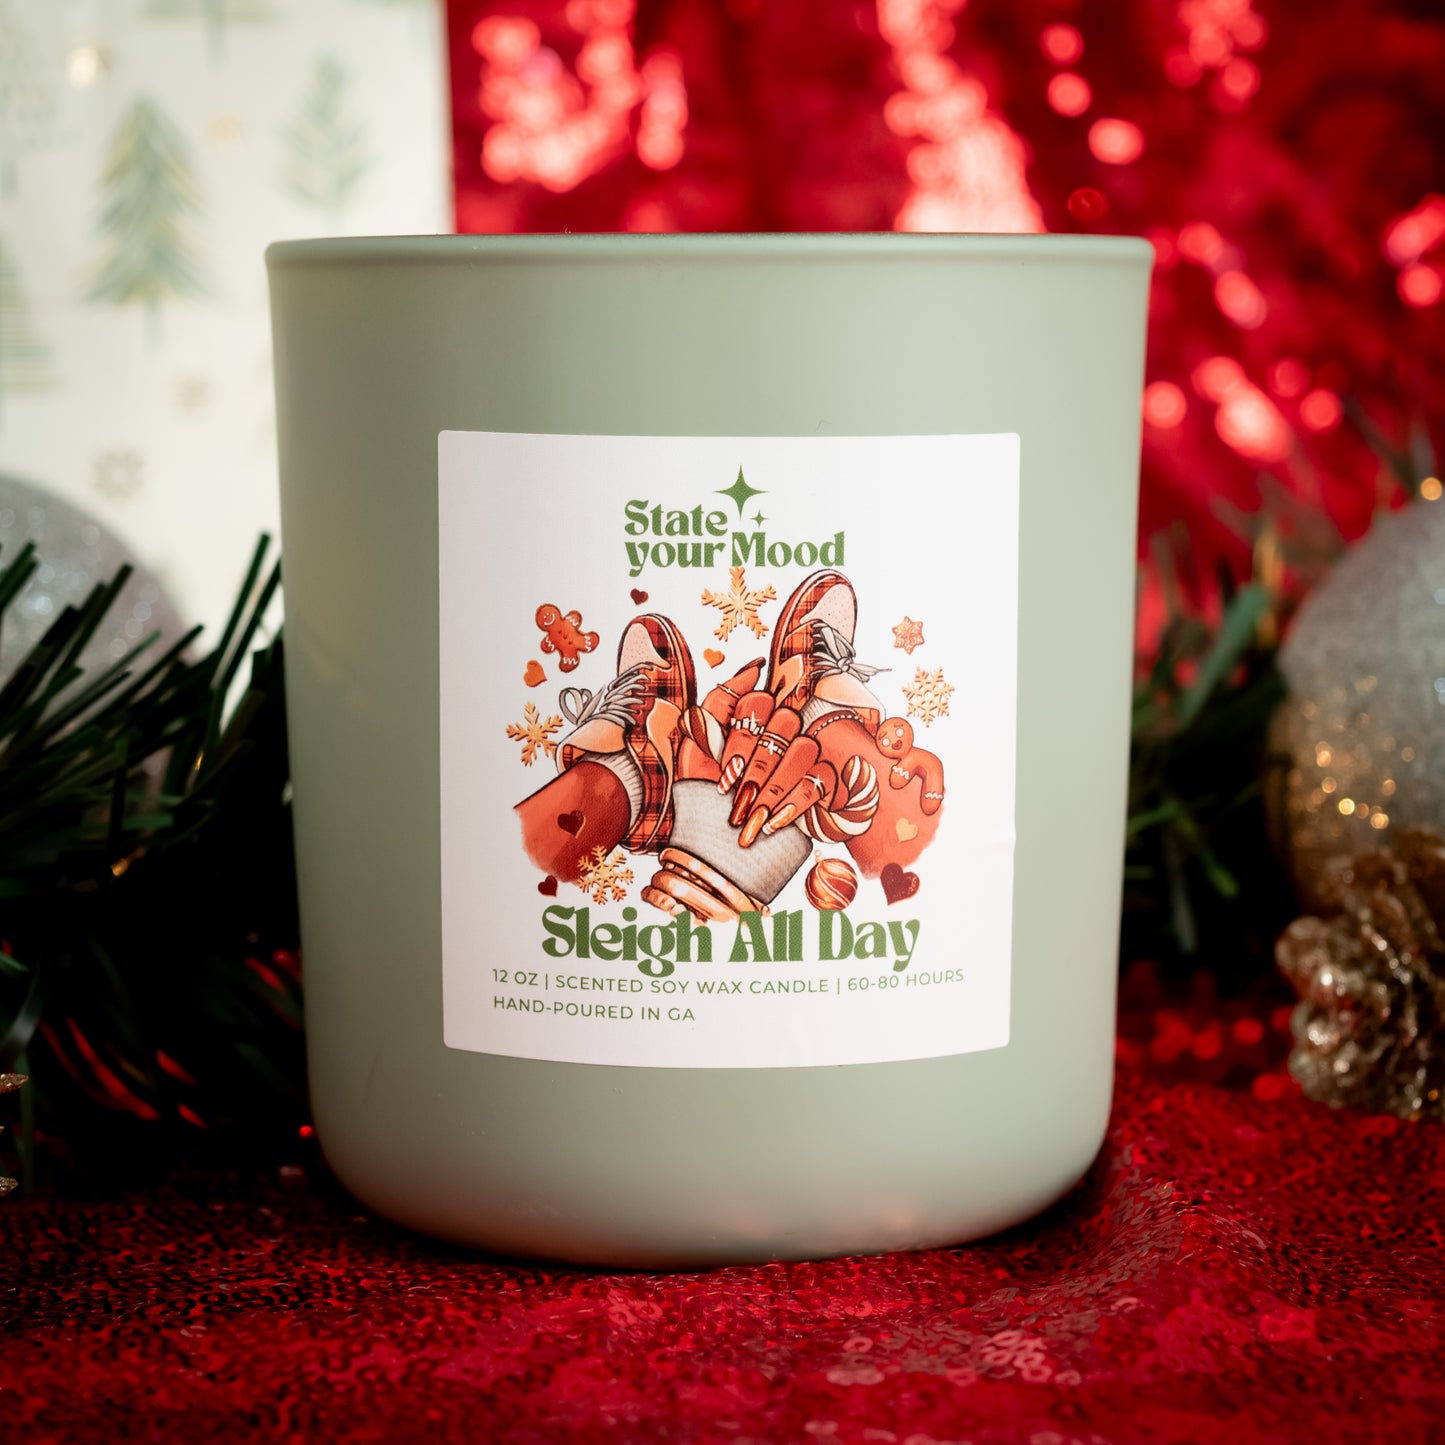 Sleigh All Day Candlei